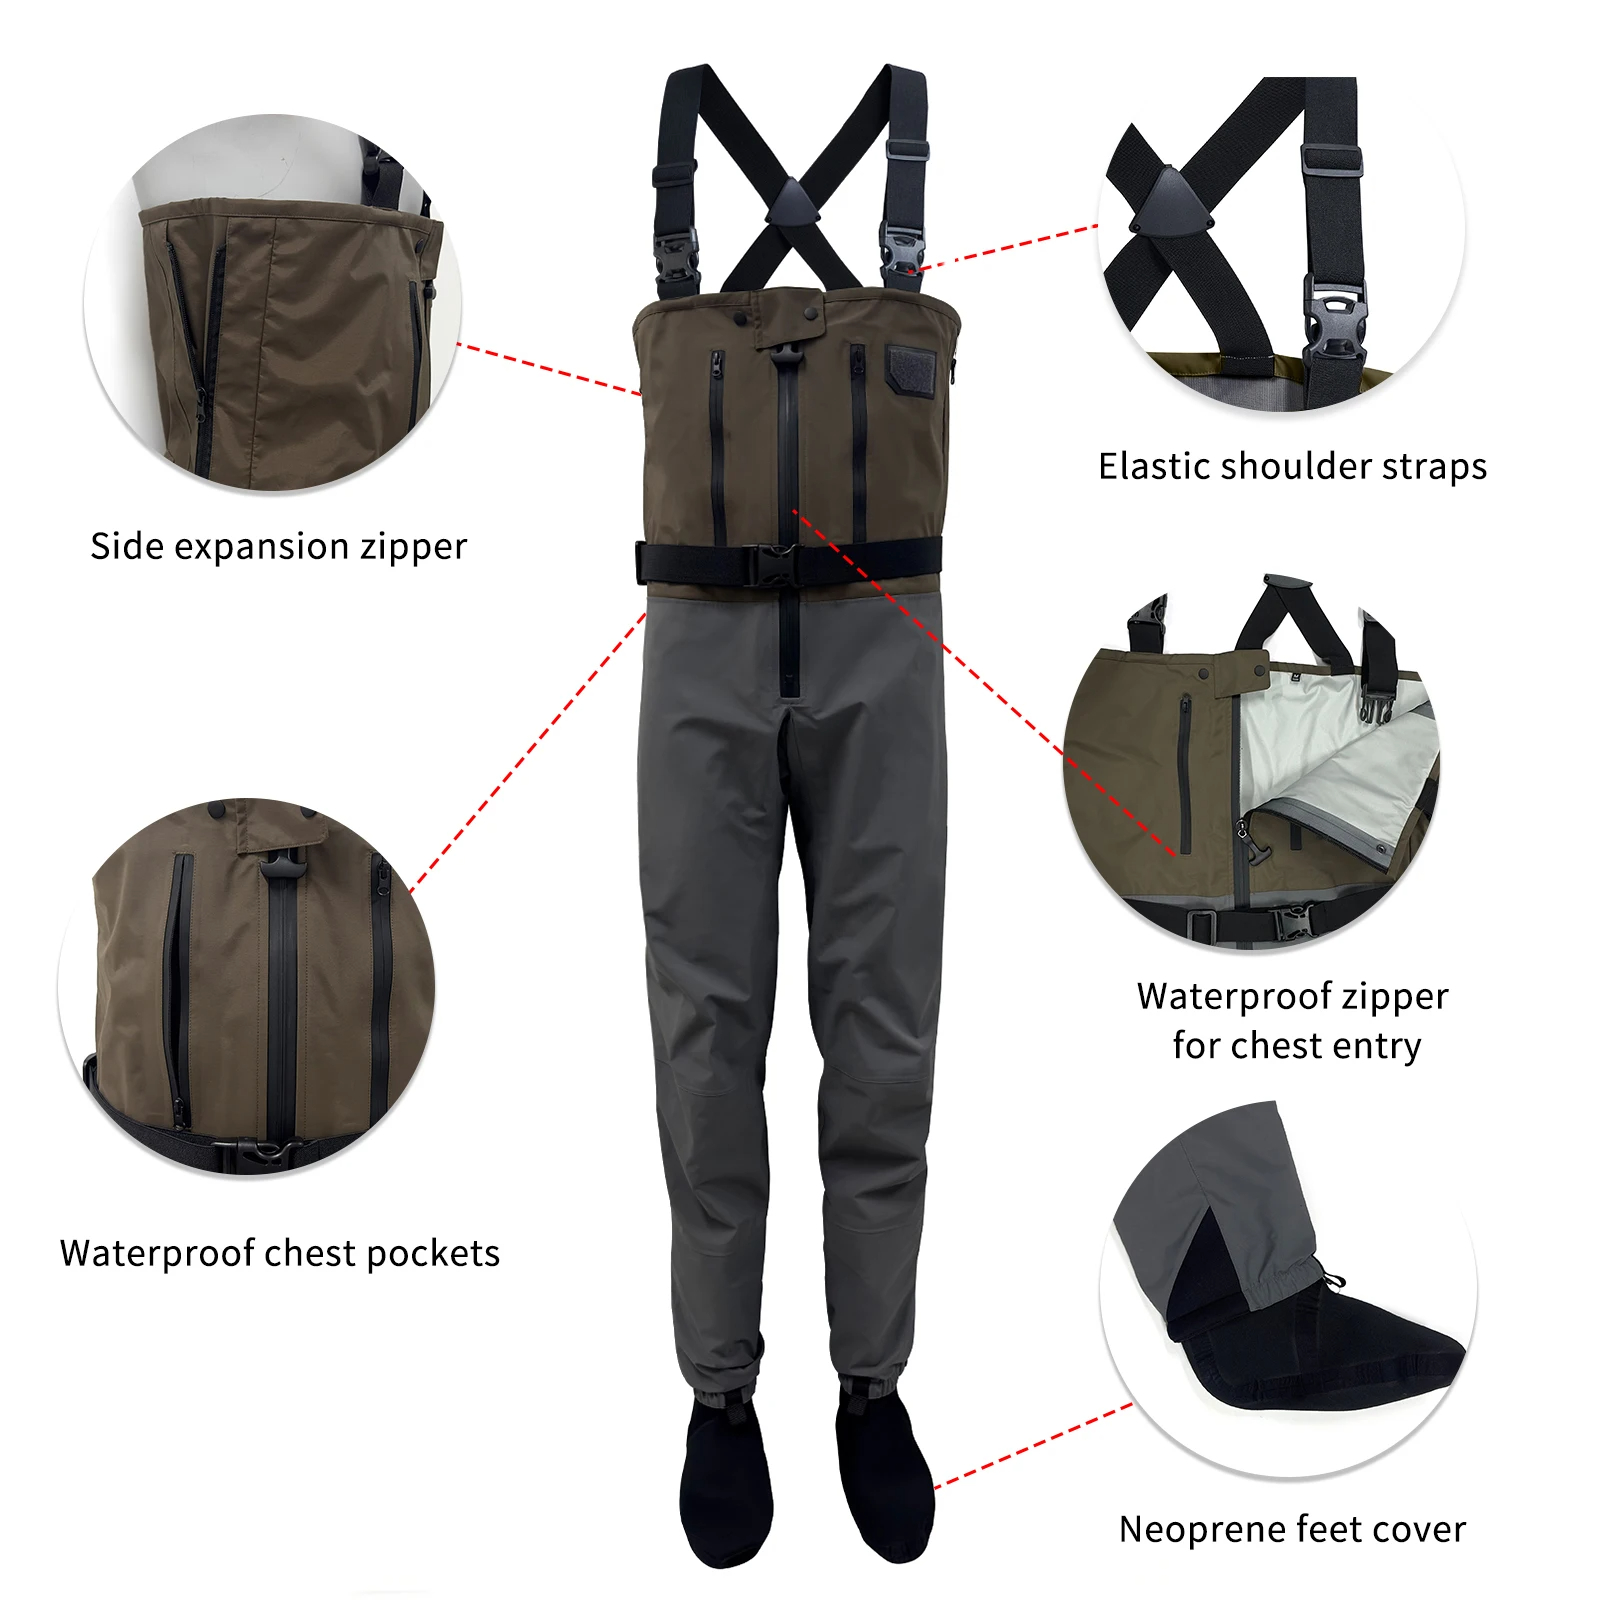 Fly Fishing Chest Waders Waterproof Stocking Foot Breathable